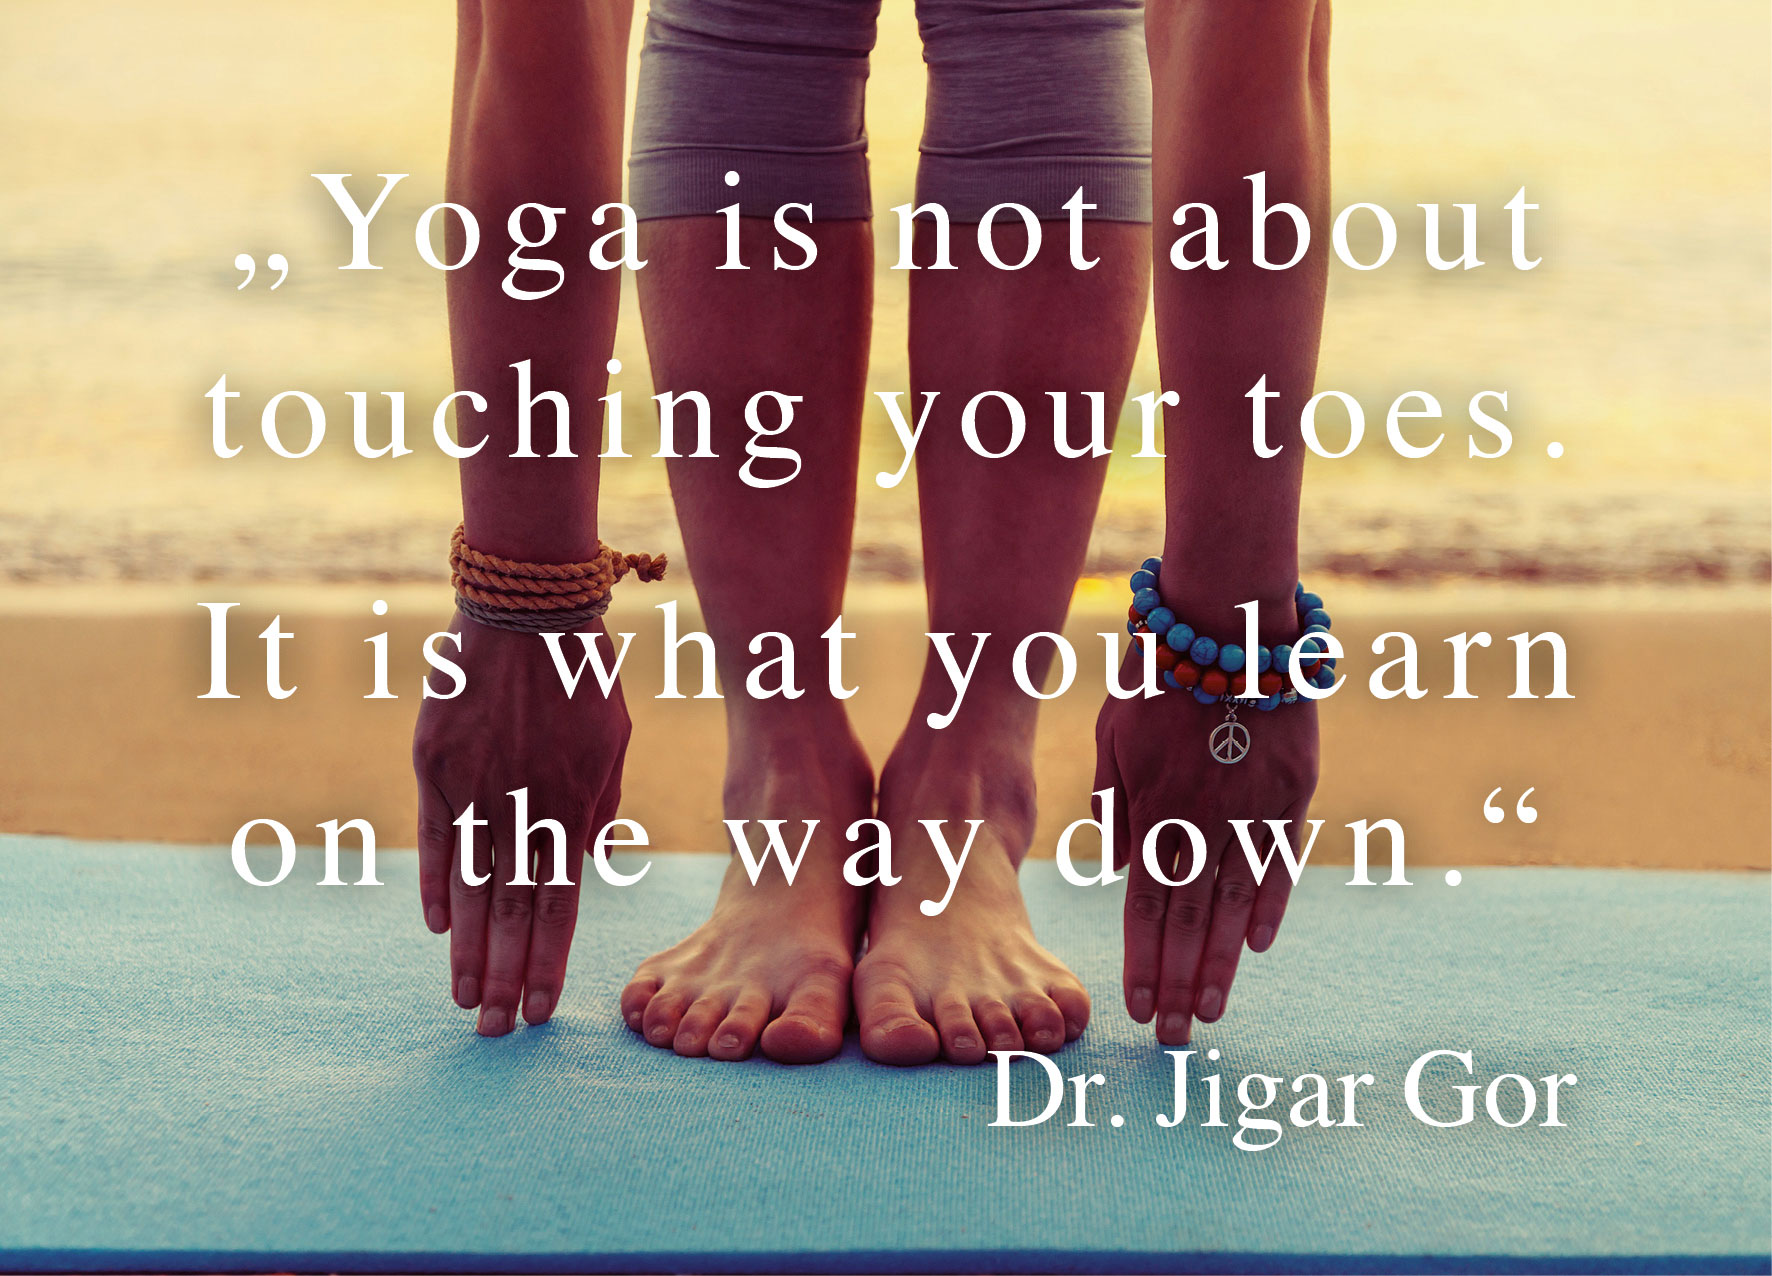 Yoga am Strand Yoga is not about touching your toes it is what you lear on the way down. Zitat von Dr. Jigar Gor